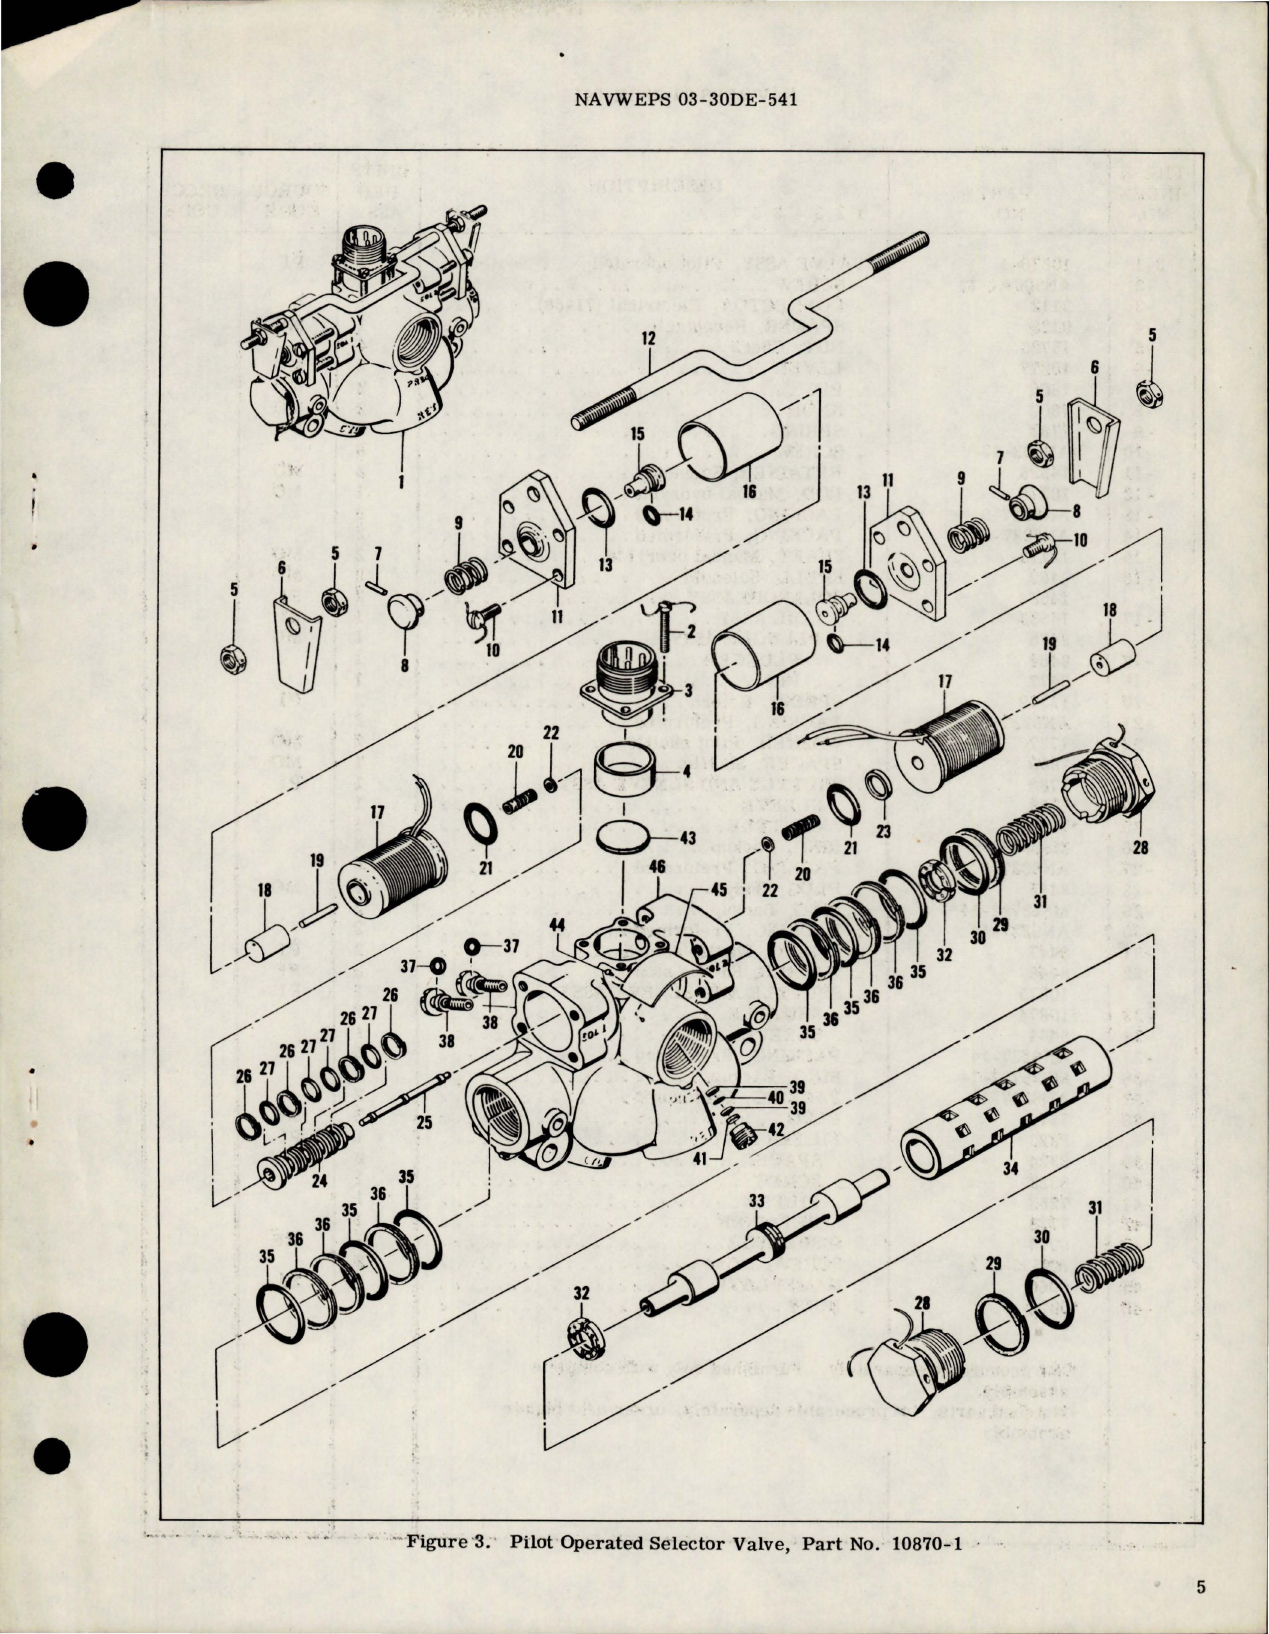 Sample page 5 from AirCorps Library document: Overhaul Instructions with Parts Breakdown for Pilot Operated Selector Valve - Part 10870-1 